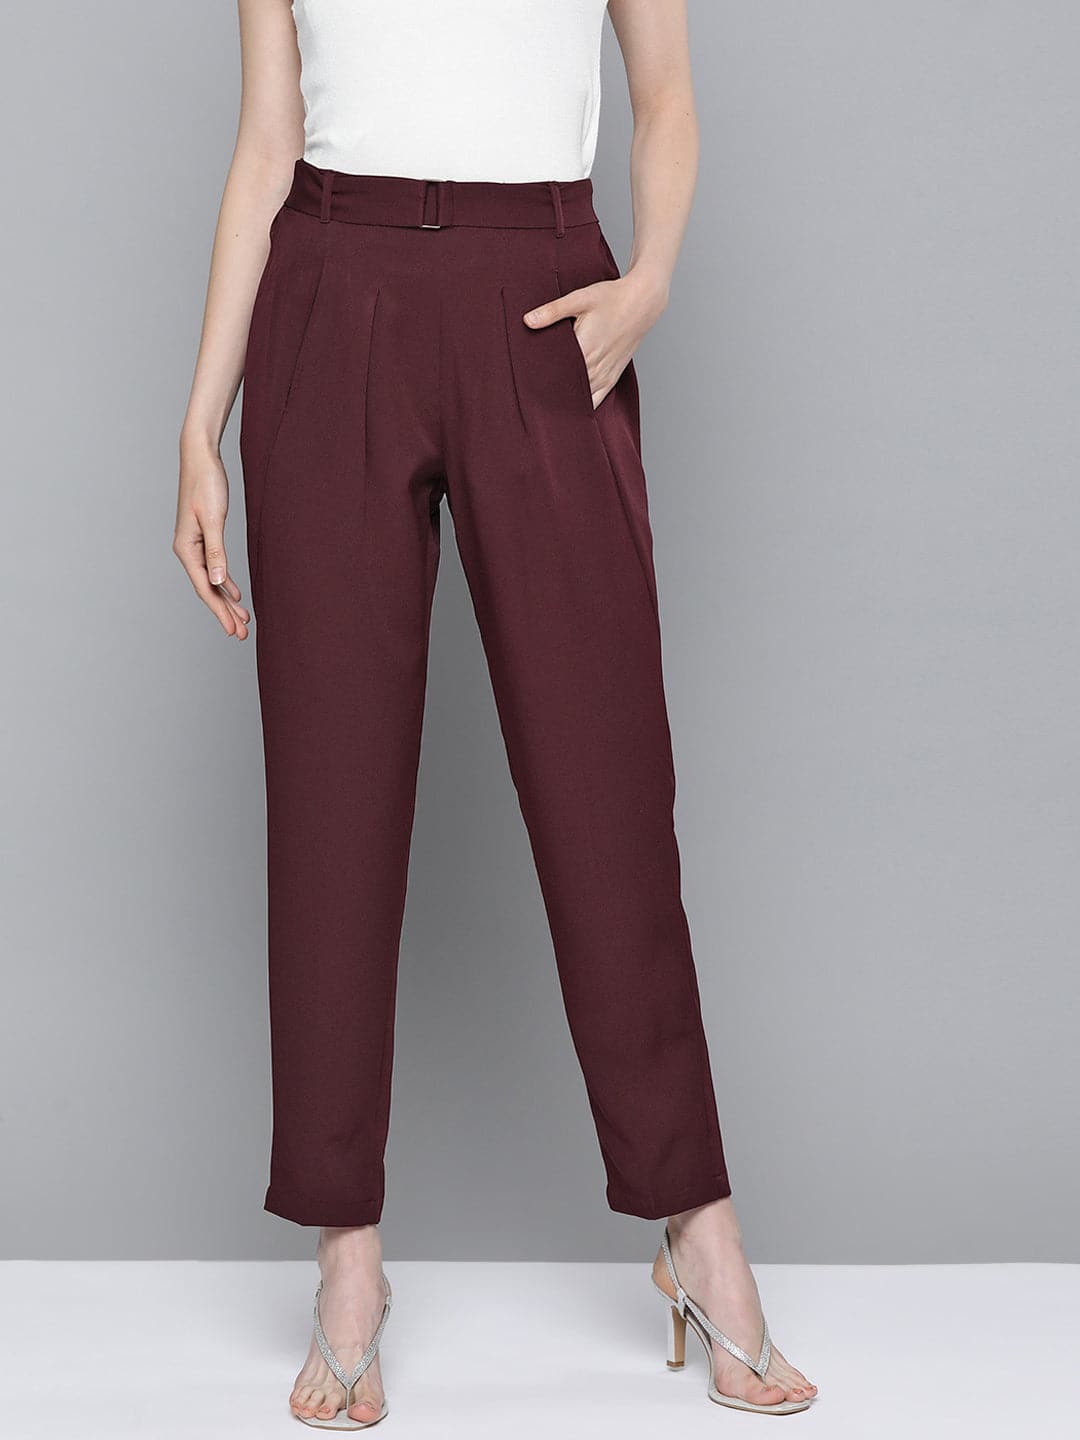 Buy Women Burgundy Front Pleat Tapered Pants Online At Best Price